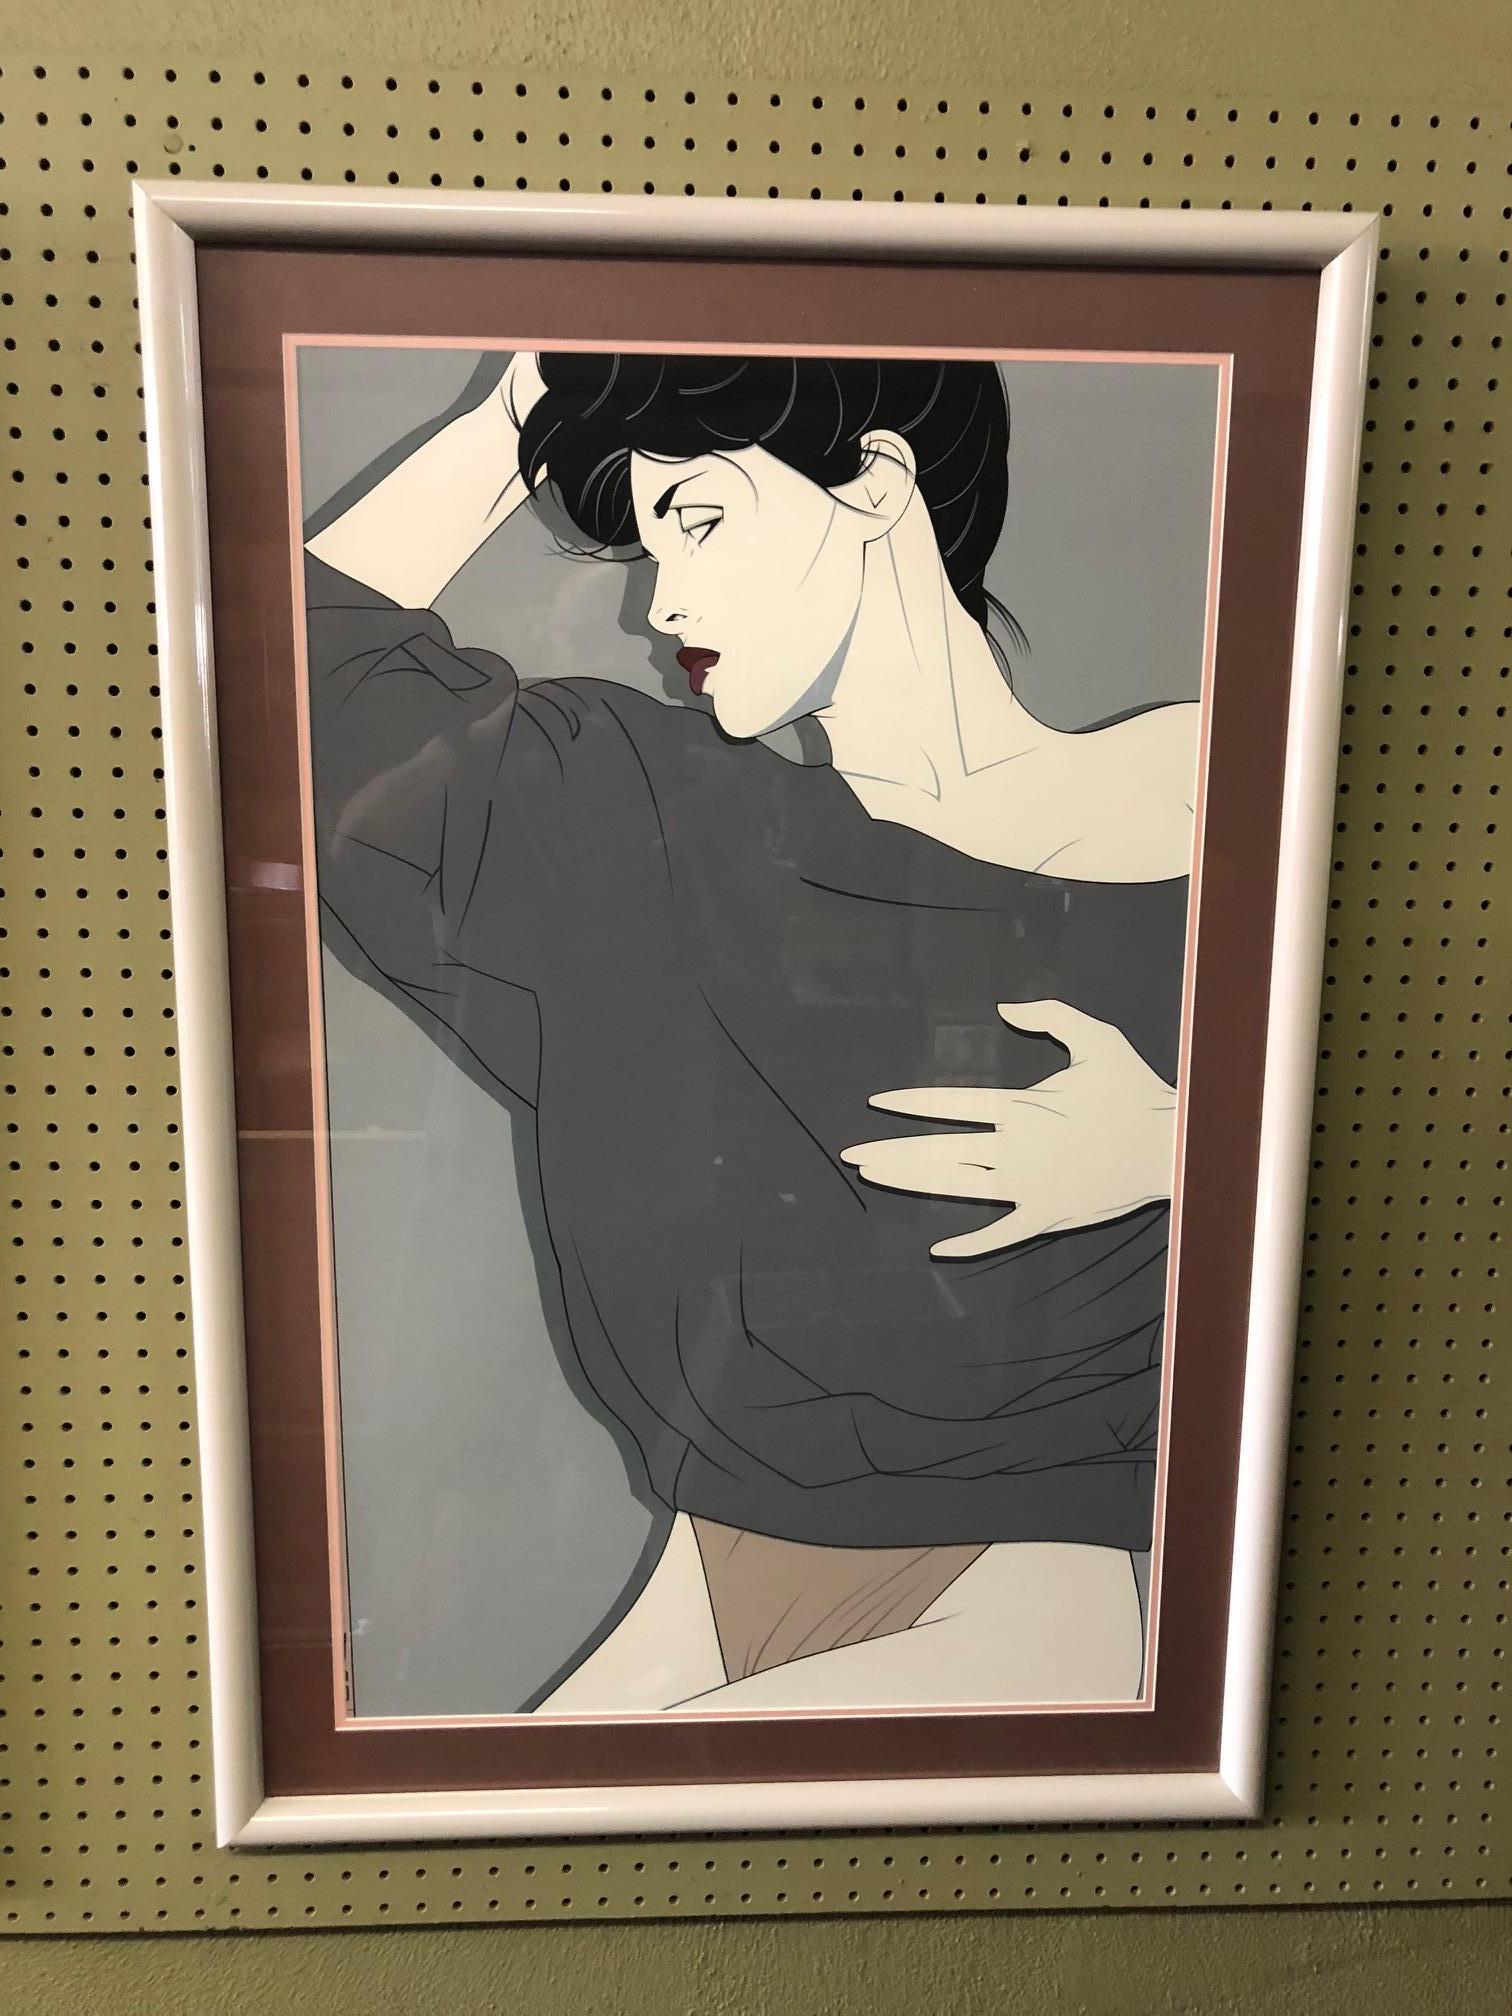 Limited edition serigraph (silkscreen) by Patrick Nagel published by Mirage Editions, Santa Monica, CA, circa early 1980s.

Patrick Nagel was an American artist who did work for Playboy magazine throughout the 1980s. He created popular